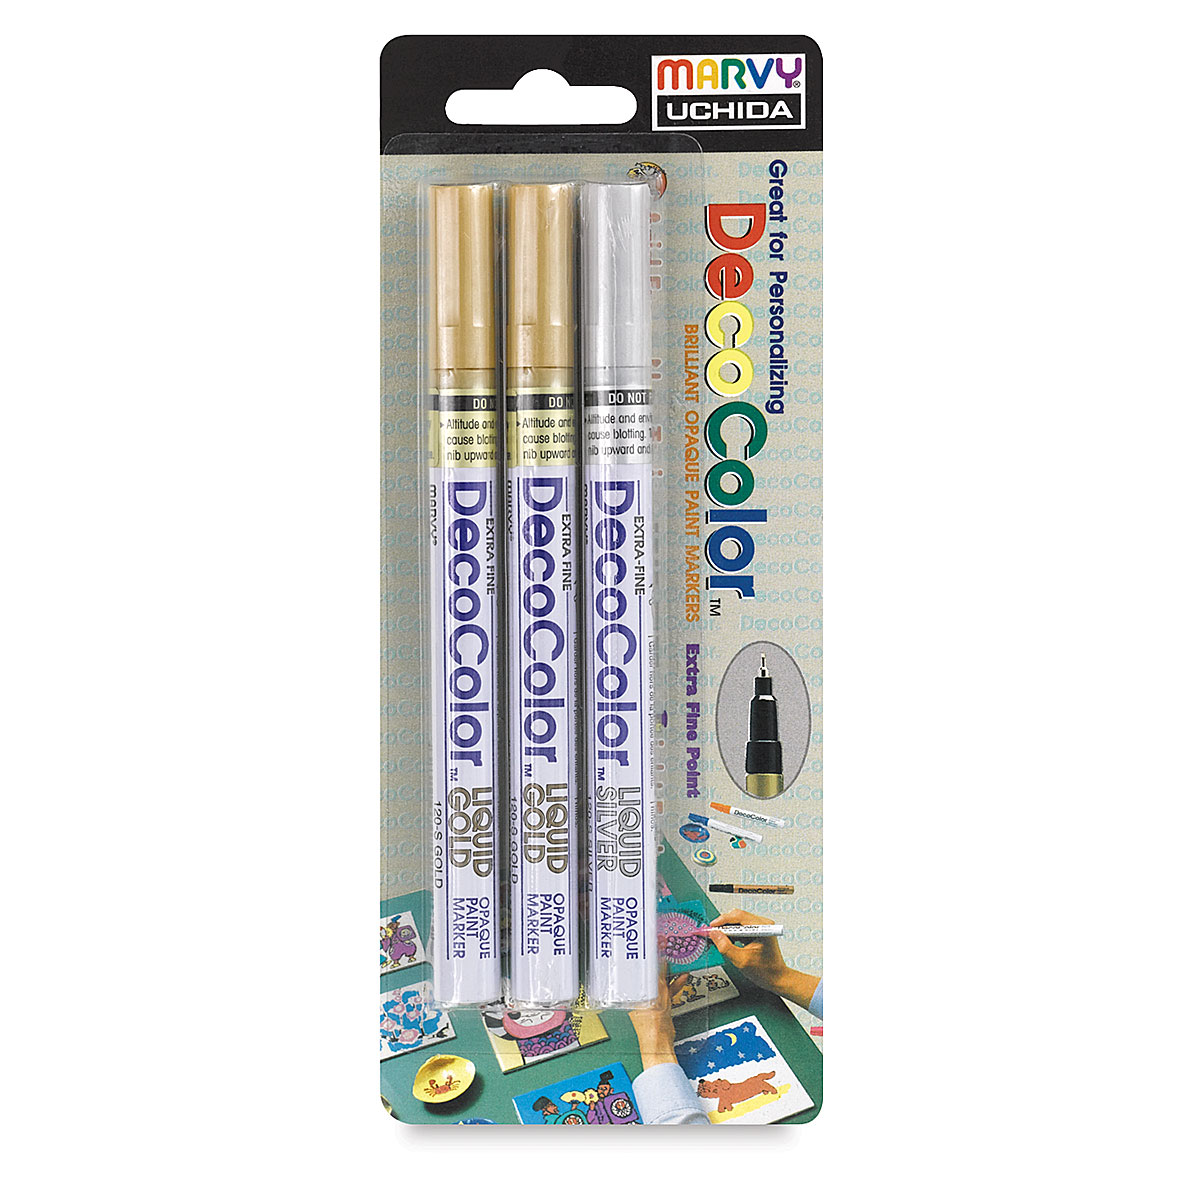 Can anyone tell me if these specific deco Color paint pens are